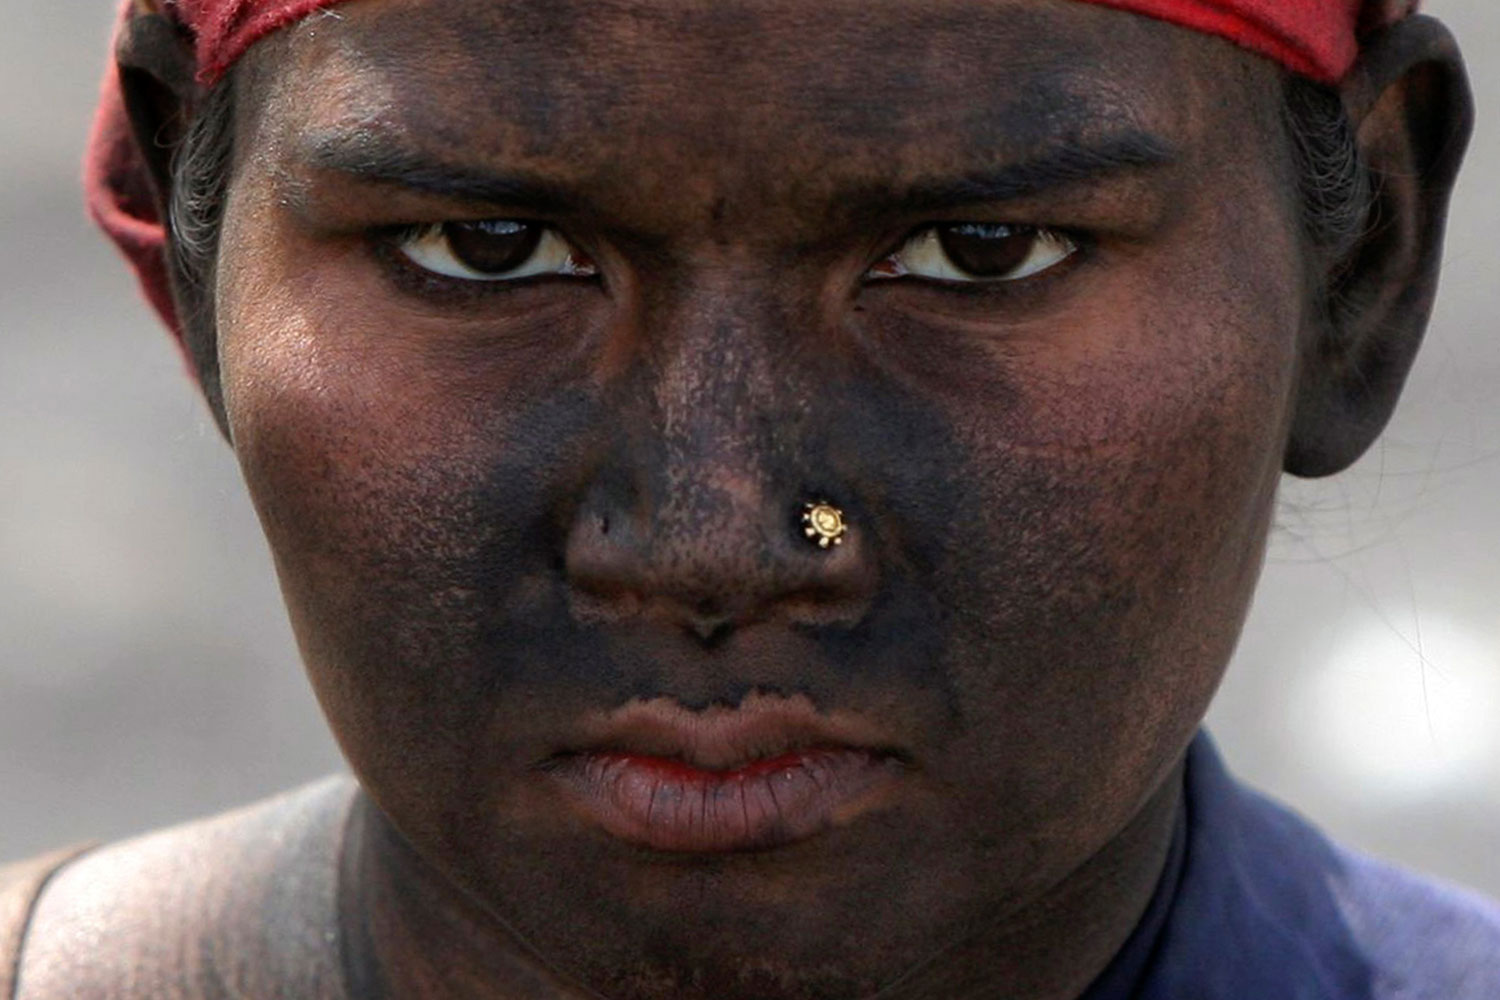 March 23, 2012. A female laborer looks on as she takes a break at a coal yard on the outskirts of Jammu, India.